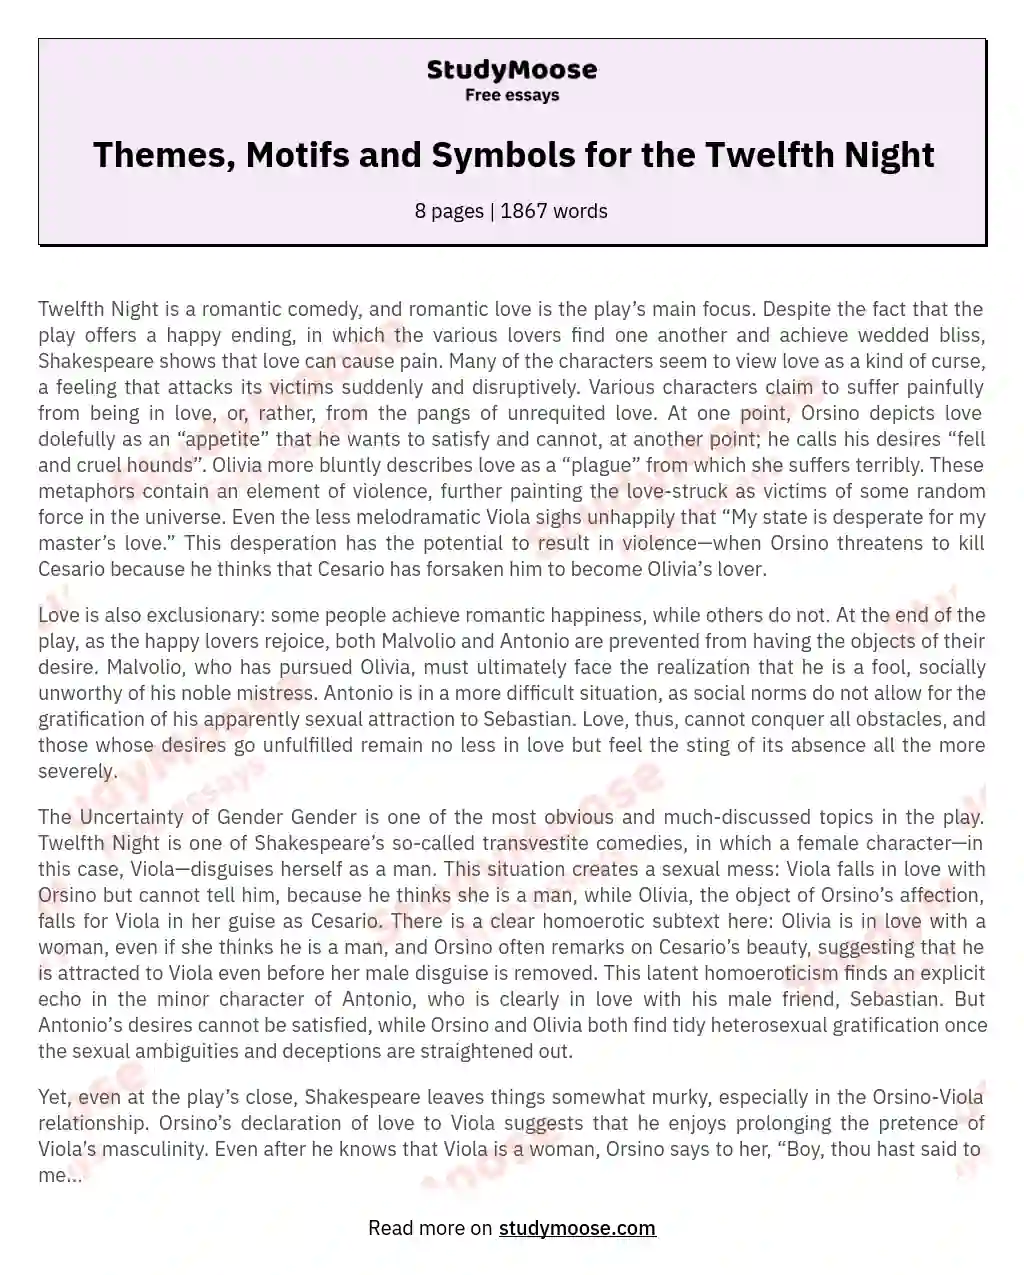 Themes, Motifs and Symbols for the Twelfth Night essay